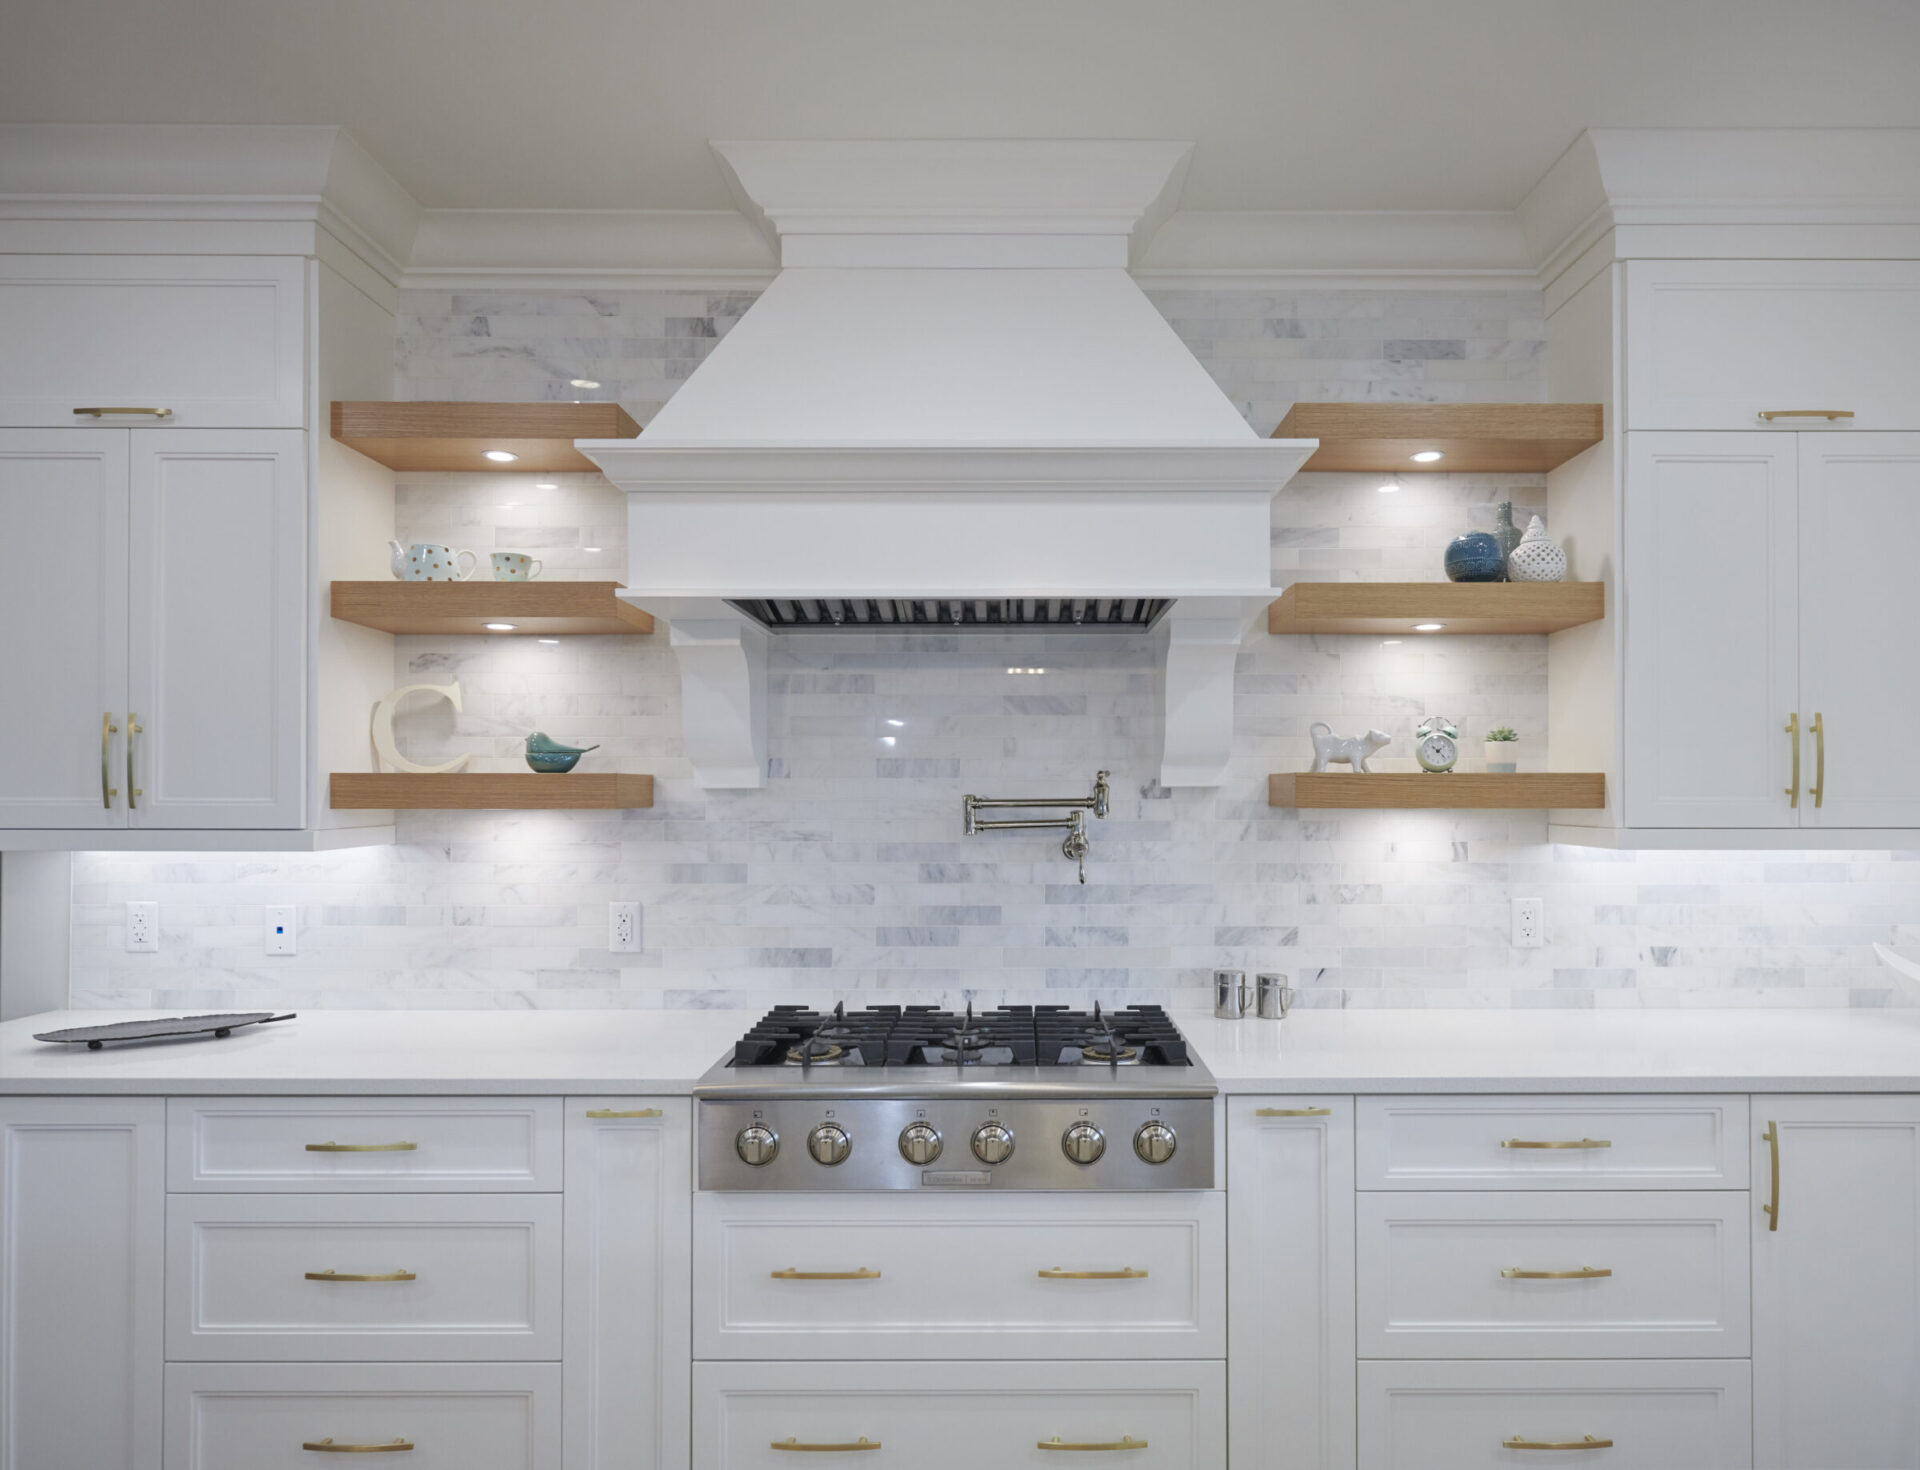 A modern kitchen with white cabinetry, marble backsplash, wooden open shelves, brass hardware, and a stainless steel range with a range hood.